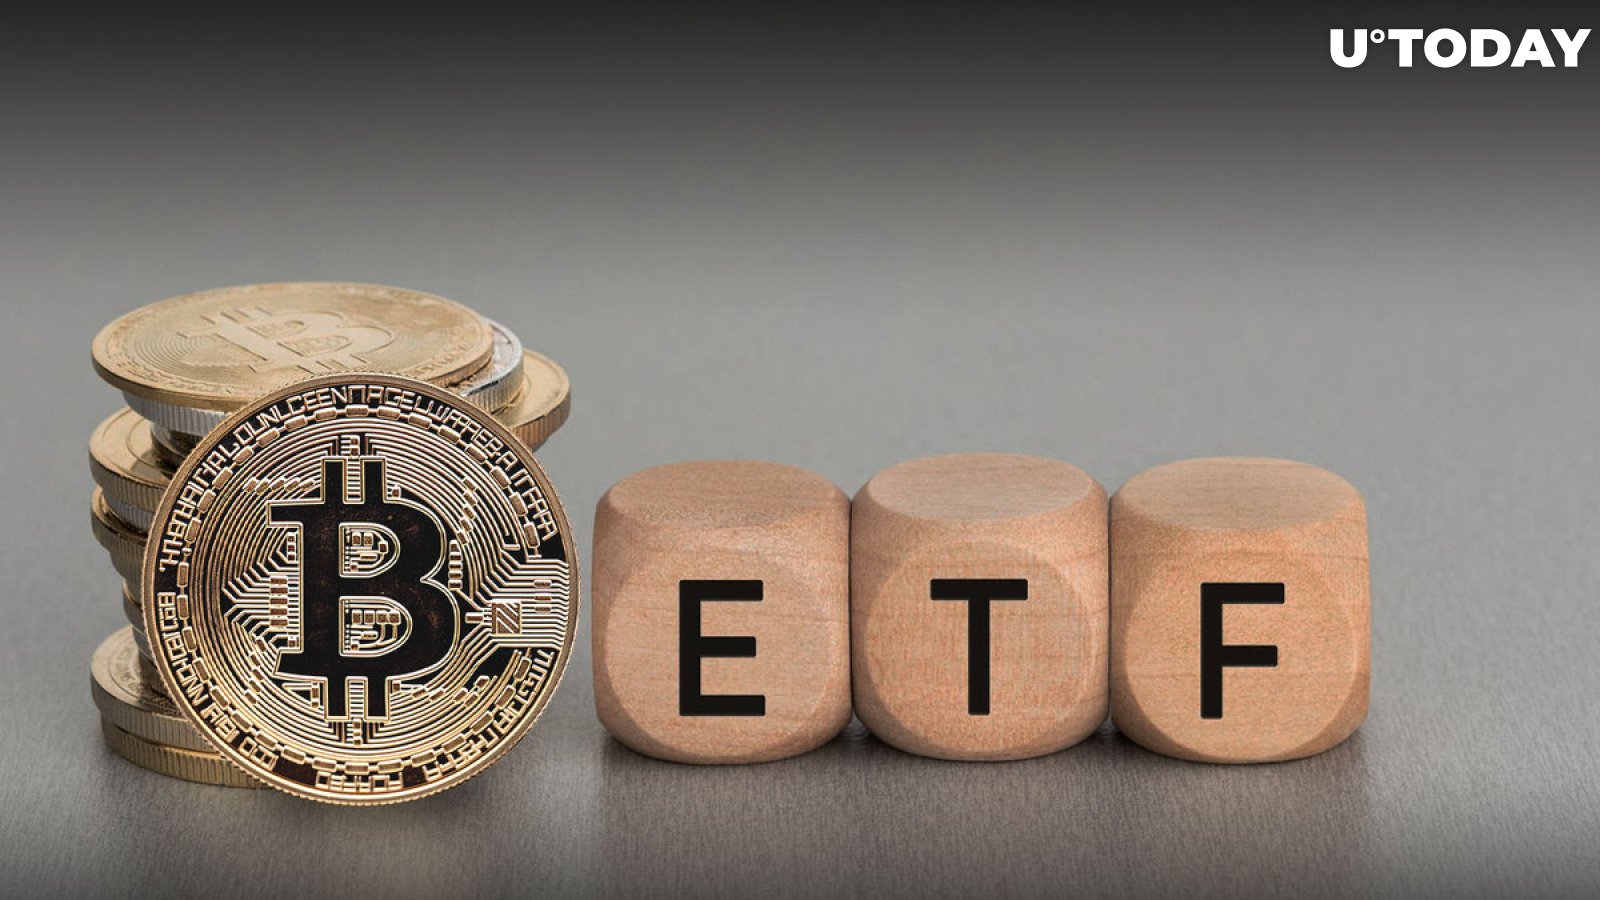 Here's When Bitcoin ETF Likely to Get Green Light, Bloomberg Expert Says, Not Tomorrow